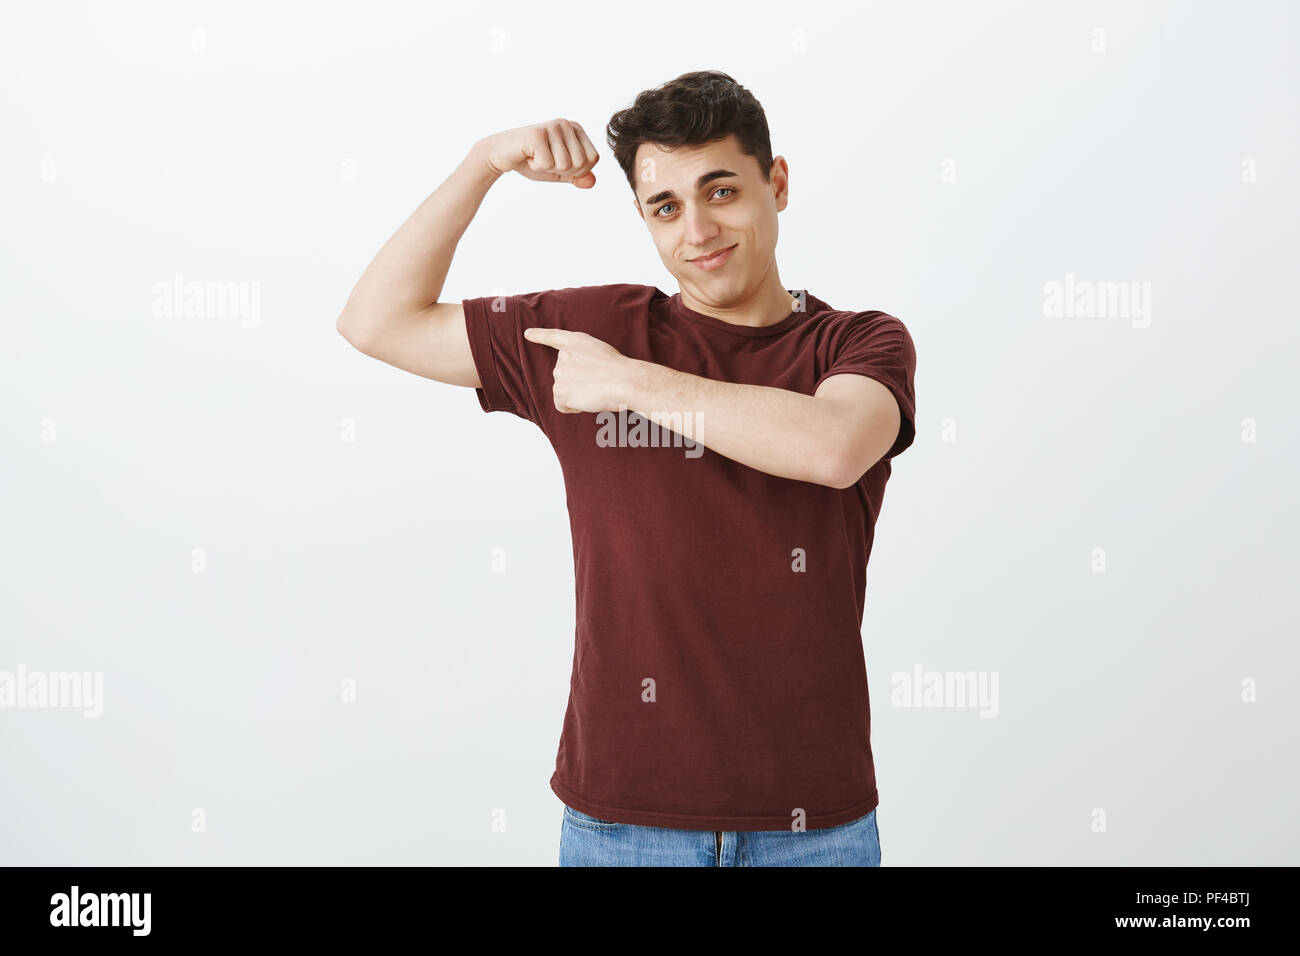 Portrait of handsome masculine happy guy in red t-shirt, raising hand and showing muscles, pointing at arm with index finger, bragging about body strength after visiting gym, enjoying working out Stock Photo